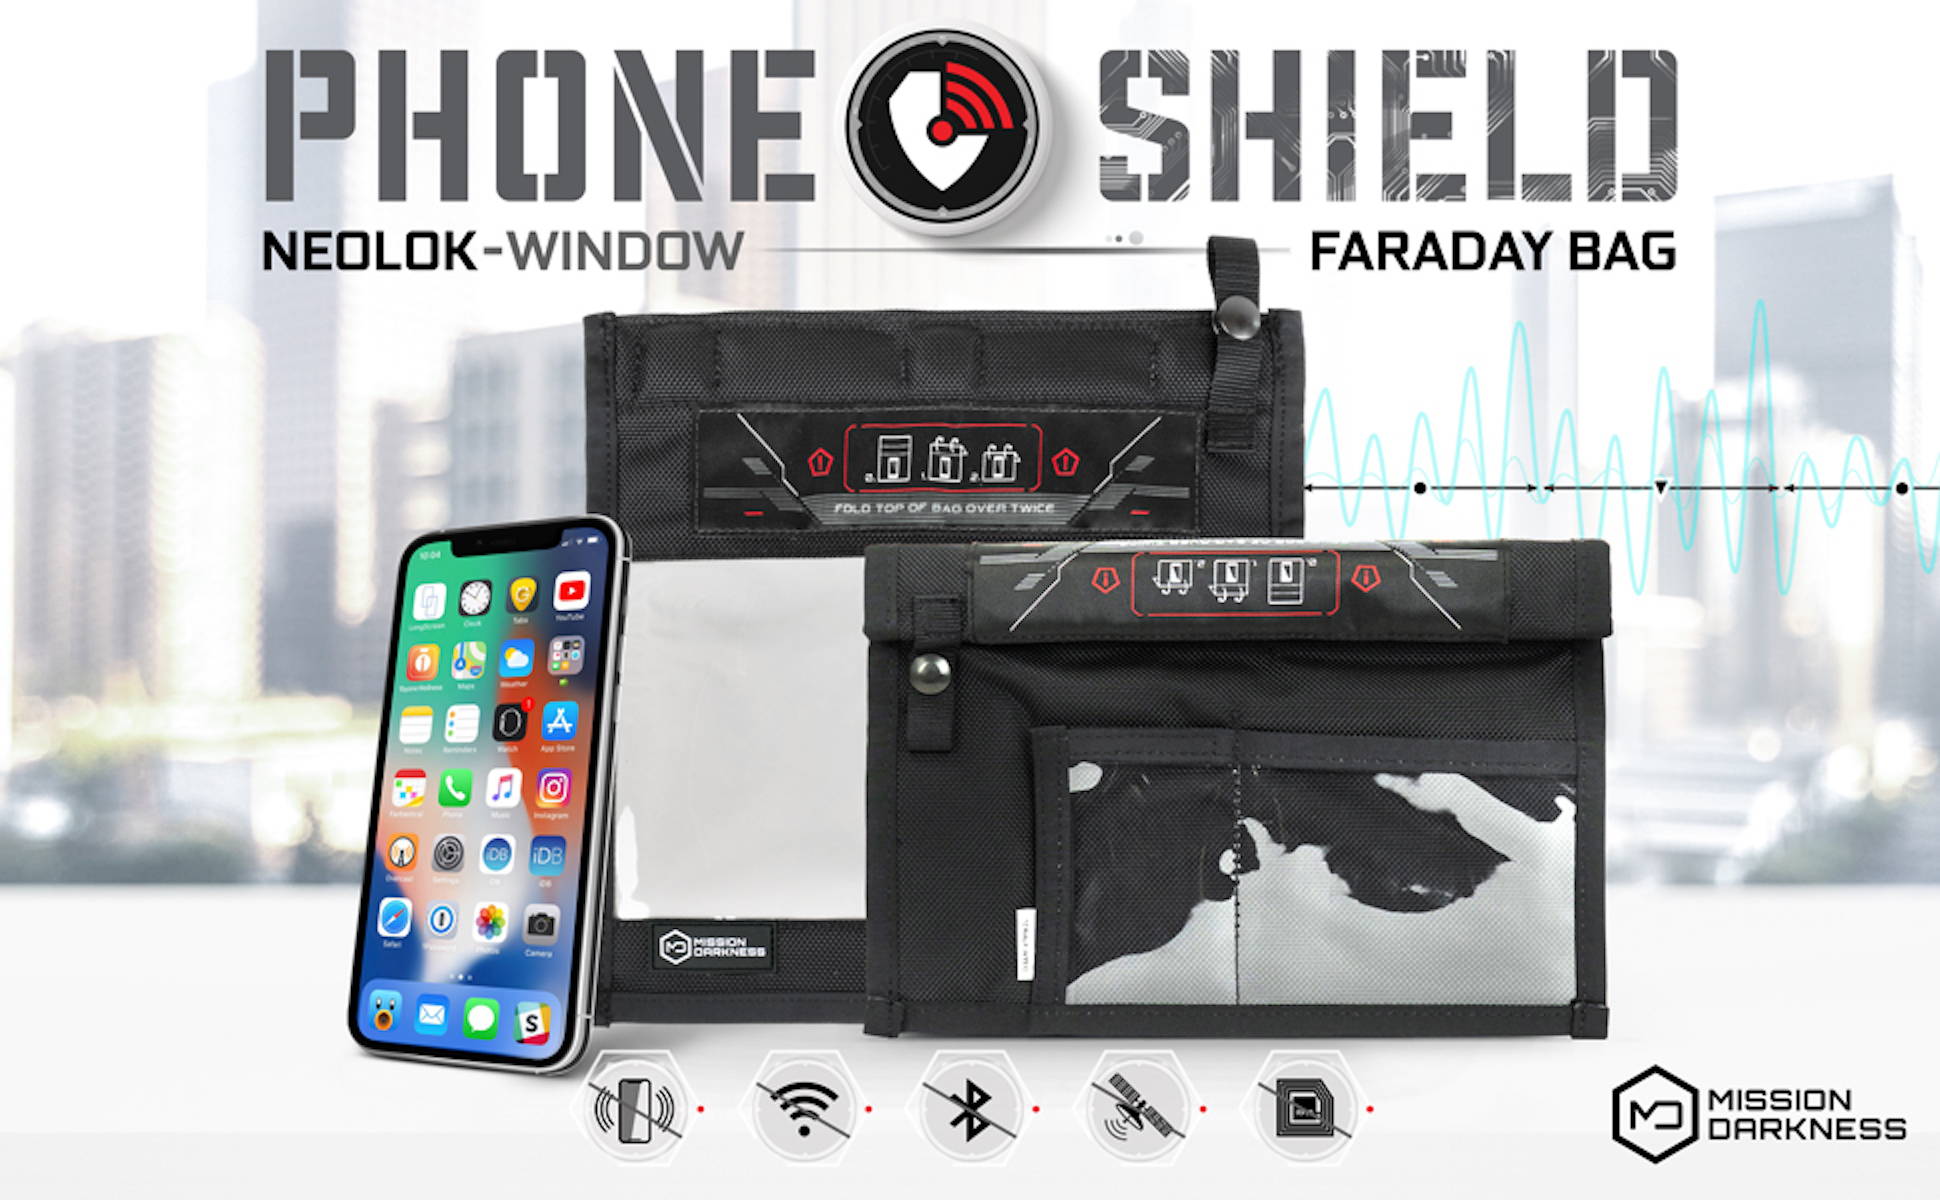 Mission Darkness NeoLok Window Faraday Bag for Phones signal blocking cell phone protection